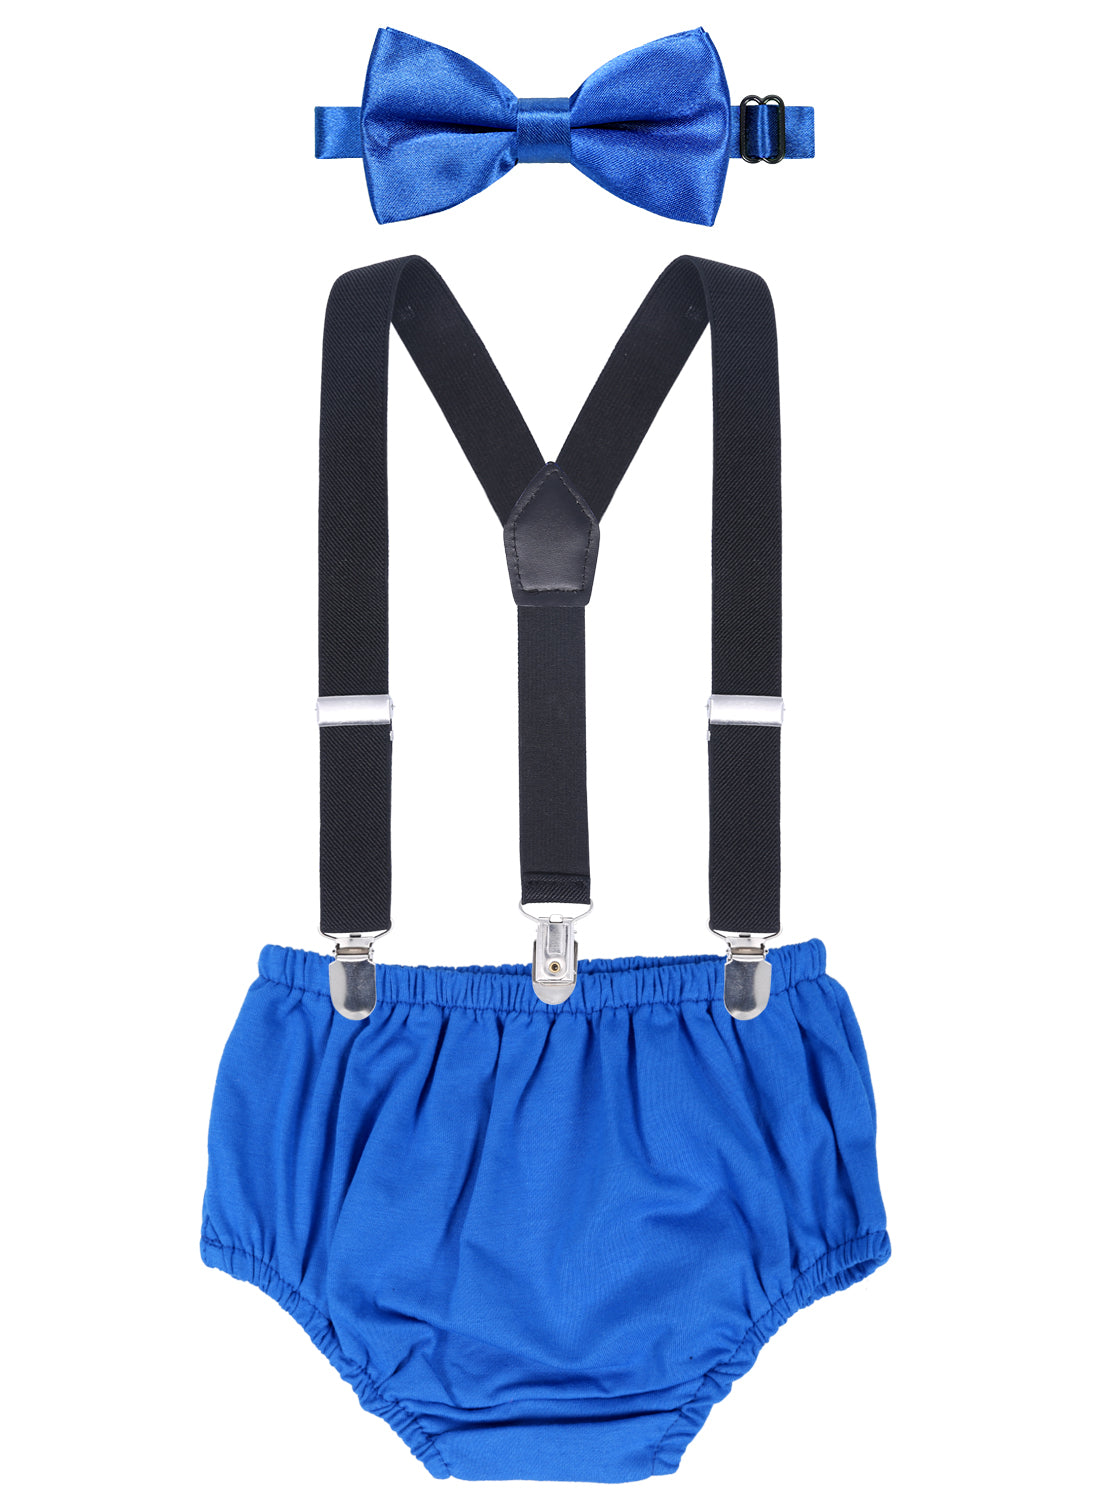 Boy's Cake Smash Costumes Combo including Adjustable Bowtie, Elastic Suspender and Bloomers Set, BD049